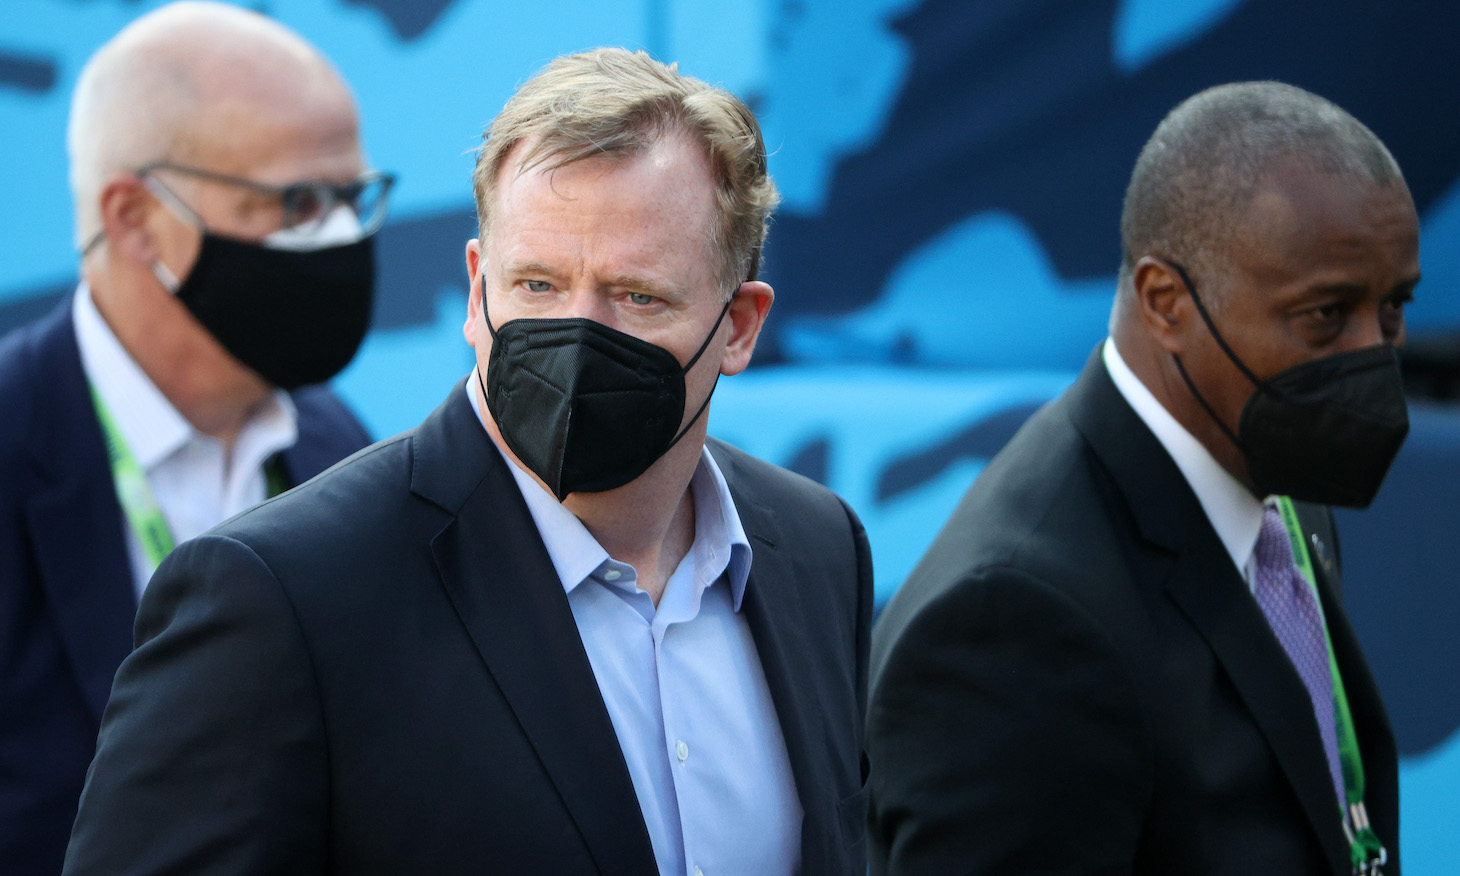 TAMPA, FLORIDA - FEBRUARY 07: NFL Commissioner Roger Goodell looks on while wearing a face covering before Super Bowl LV between the Tampa Bay Buccaneers and the Kansas City Chiefs at Raymond James Stadium on February 07, 2021 in Tampa, Florida. (Photo by Patrick Smith/Getty Images)